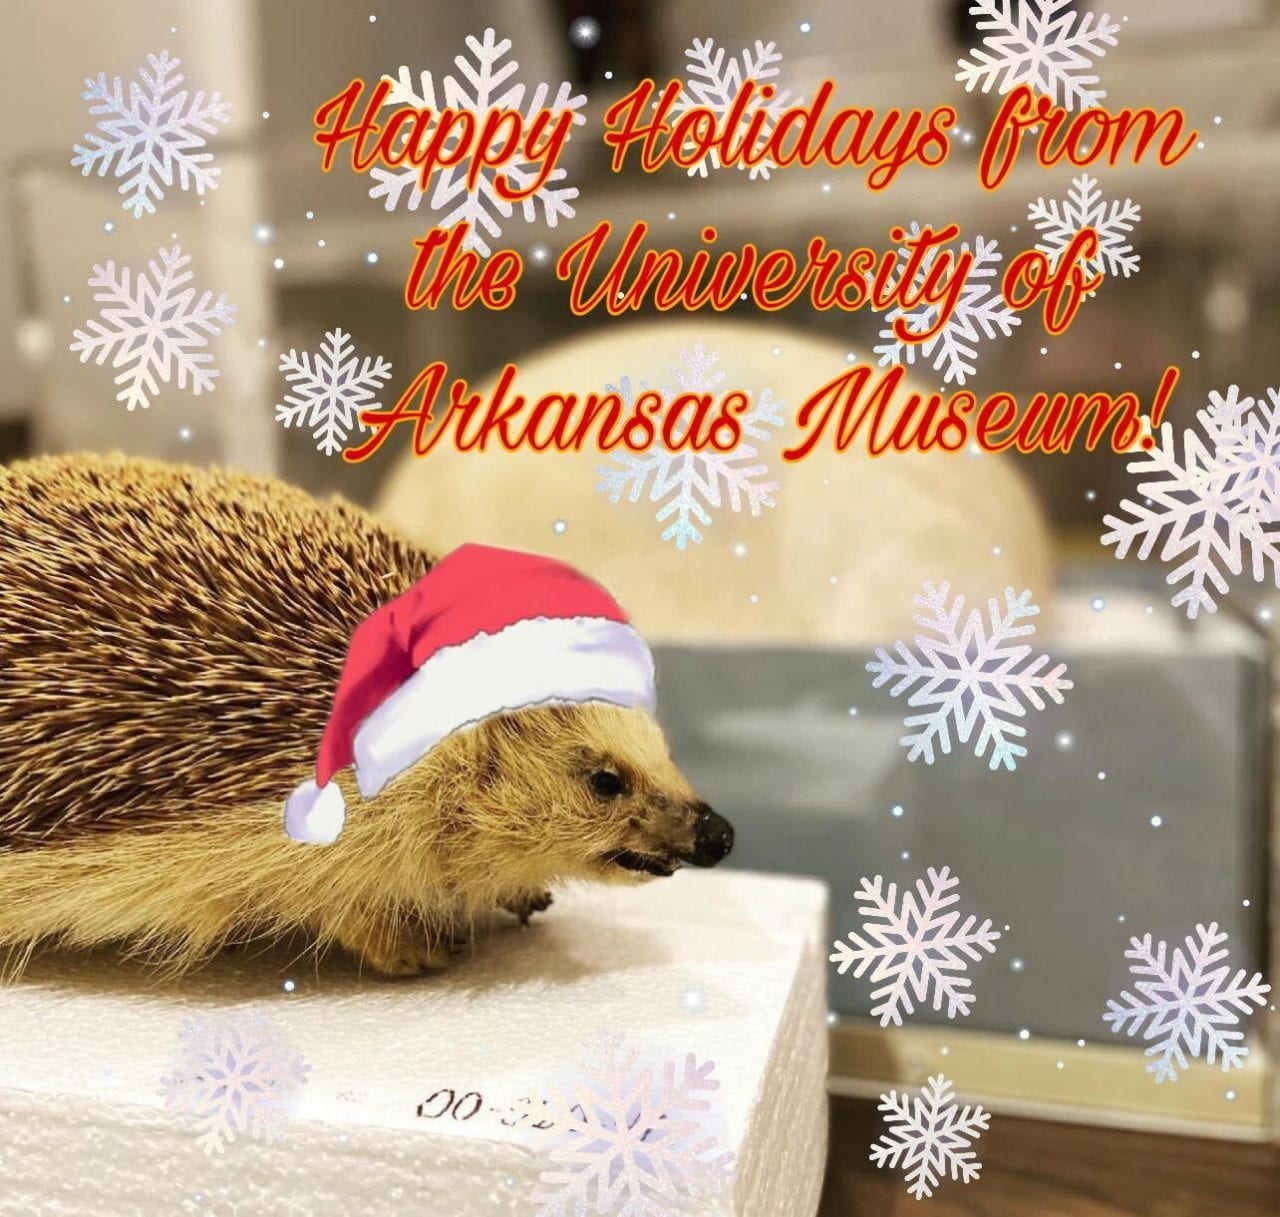 A taxodermy hedgehog with an illustrated Santa hat on its head, illustrated snowflakes falling, and the words "Happy holidays from the University of Arkansas Museum" next to it.